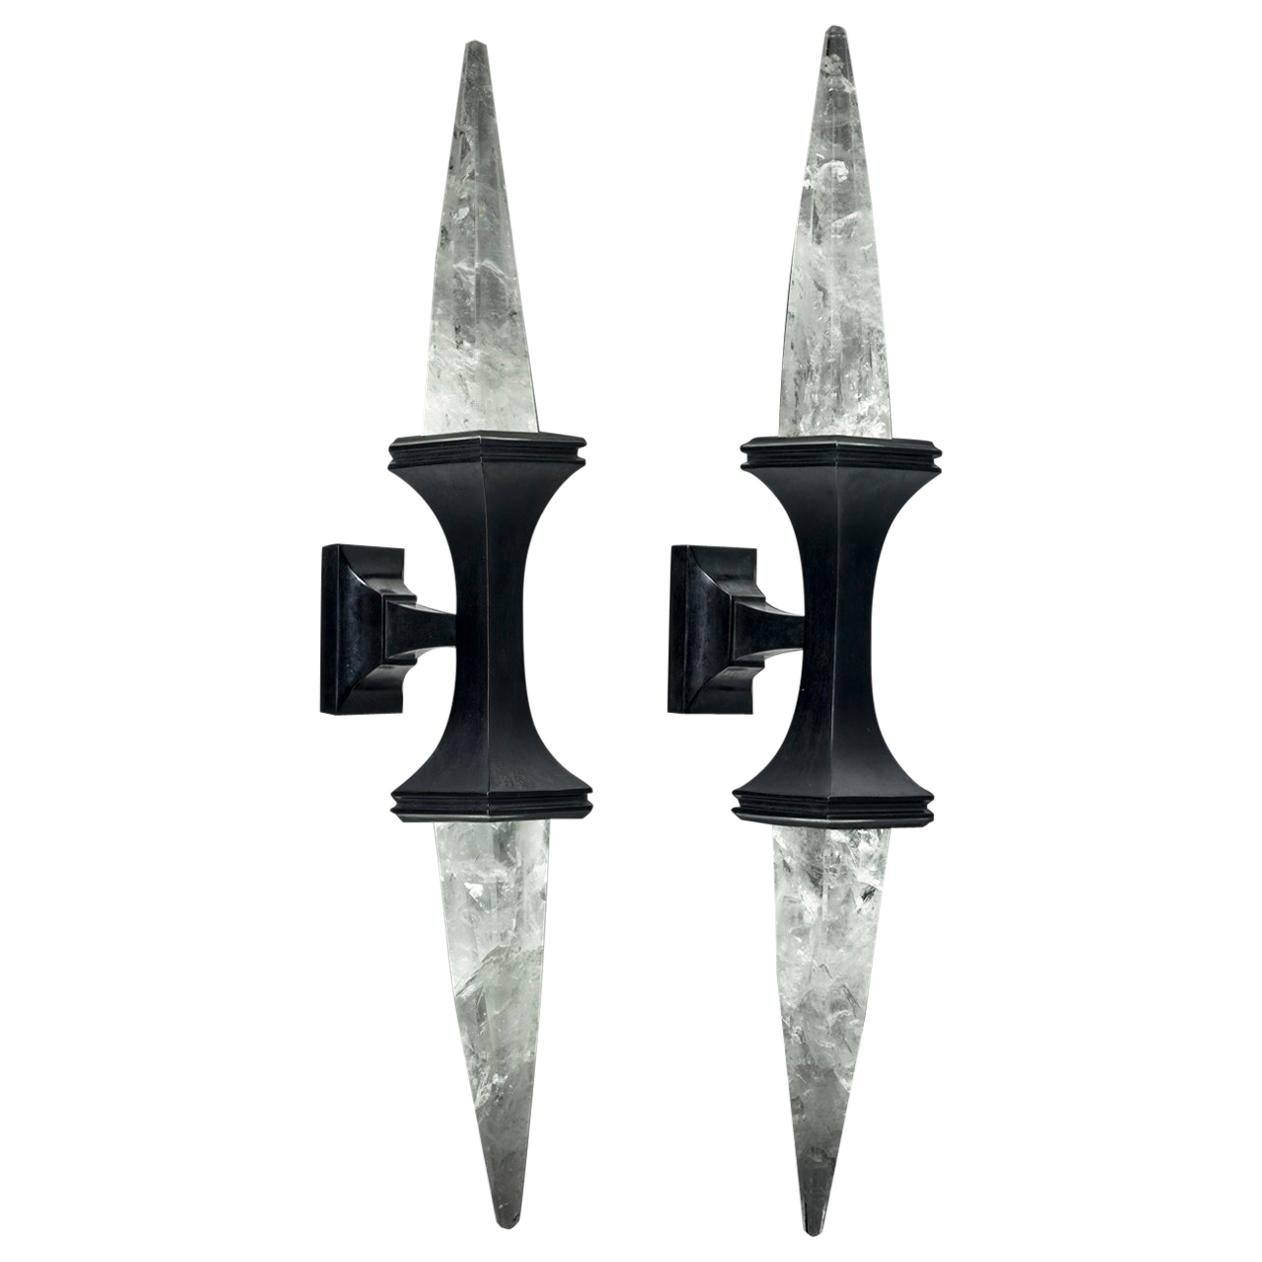 Bronze and Rock Crystal Wall Sconces, Model I, Black Edition